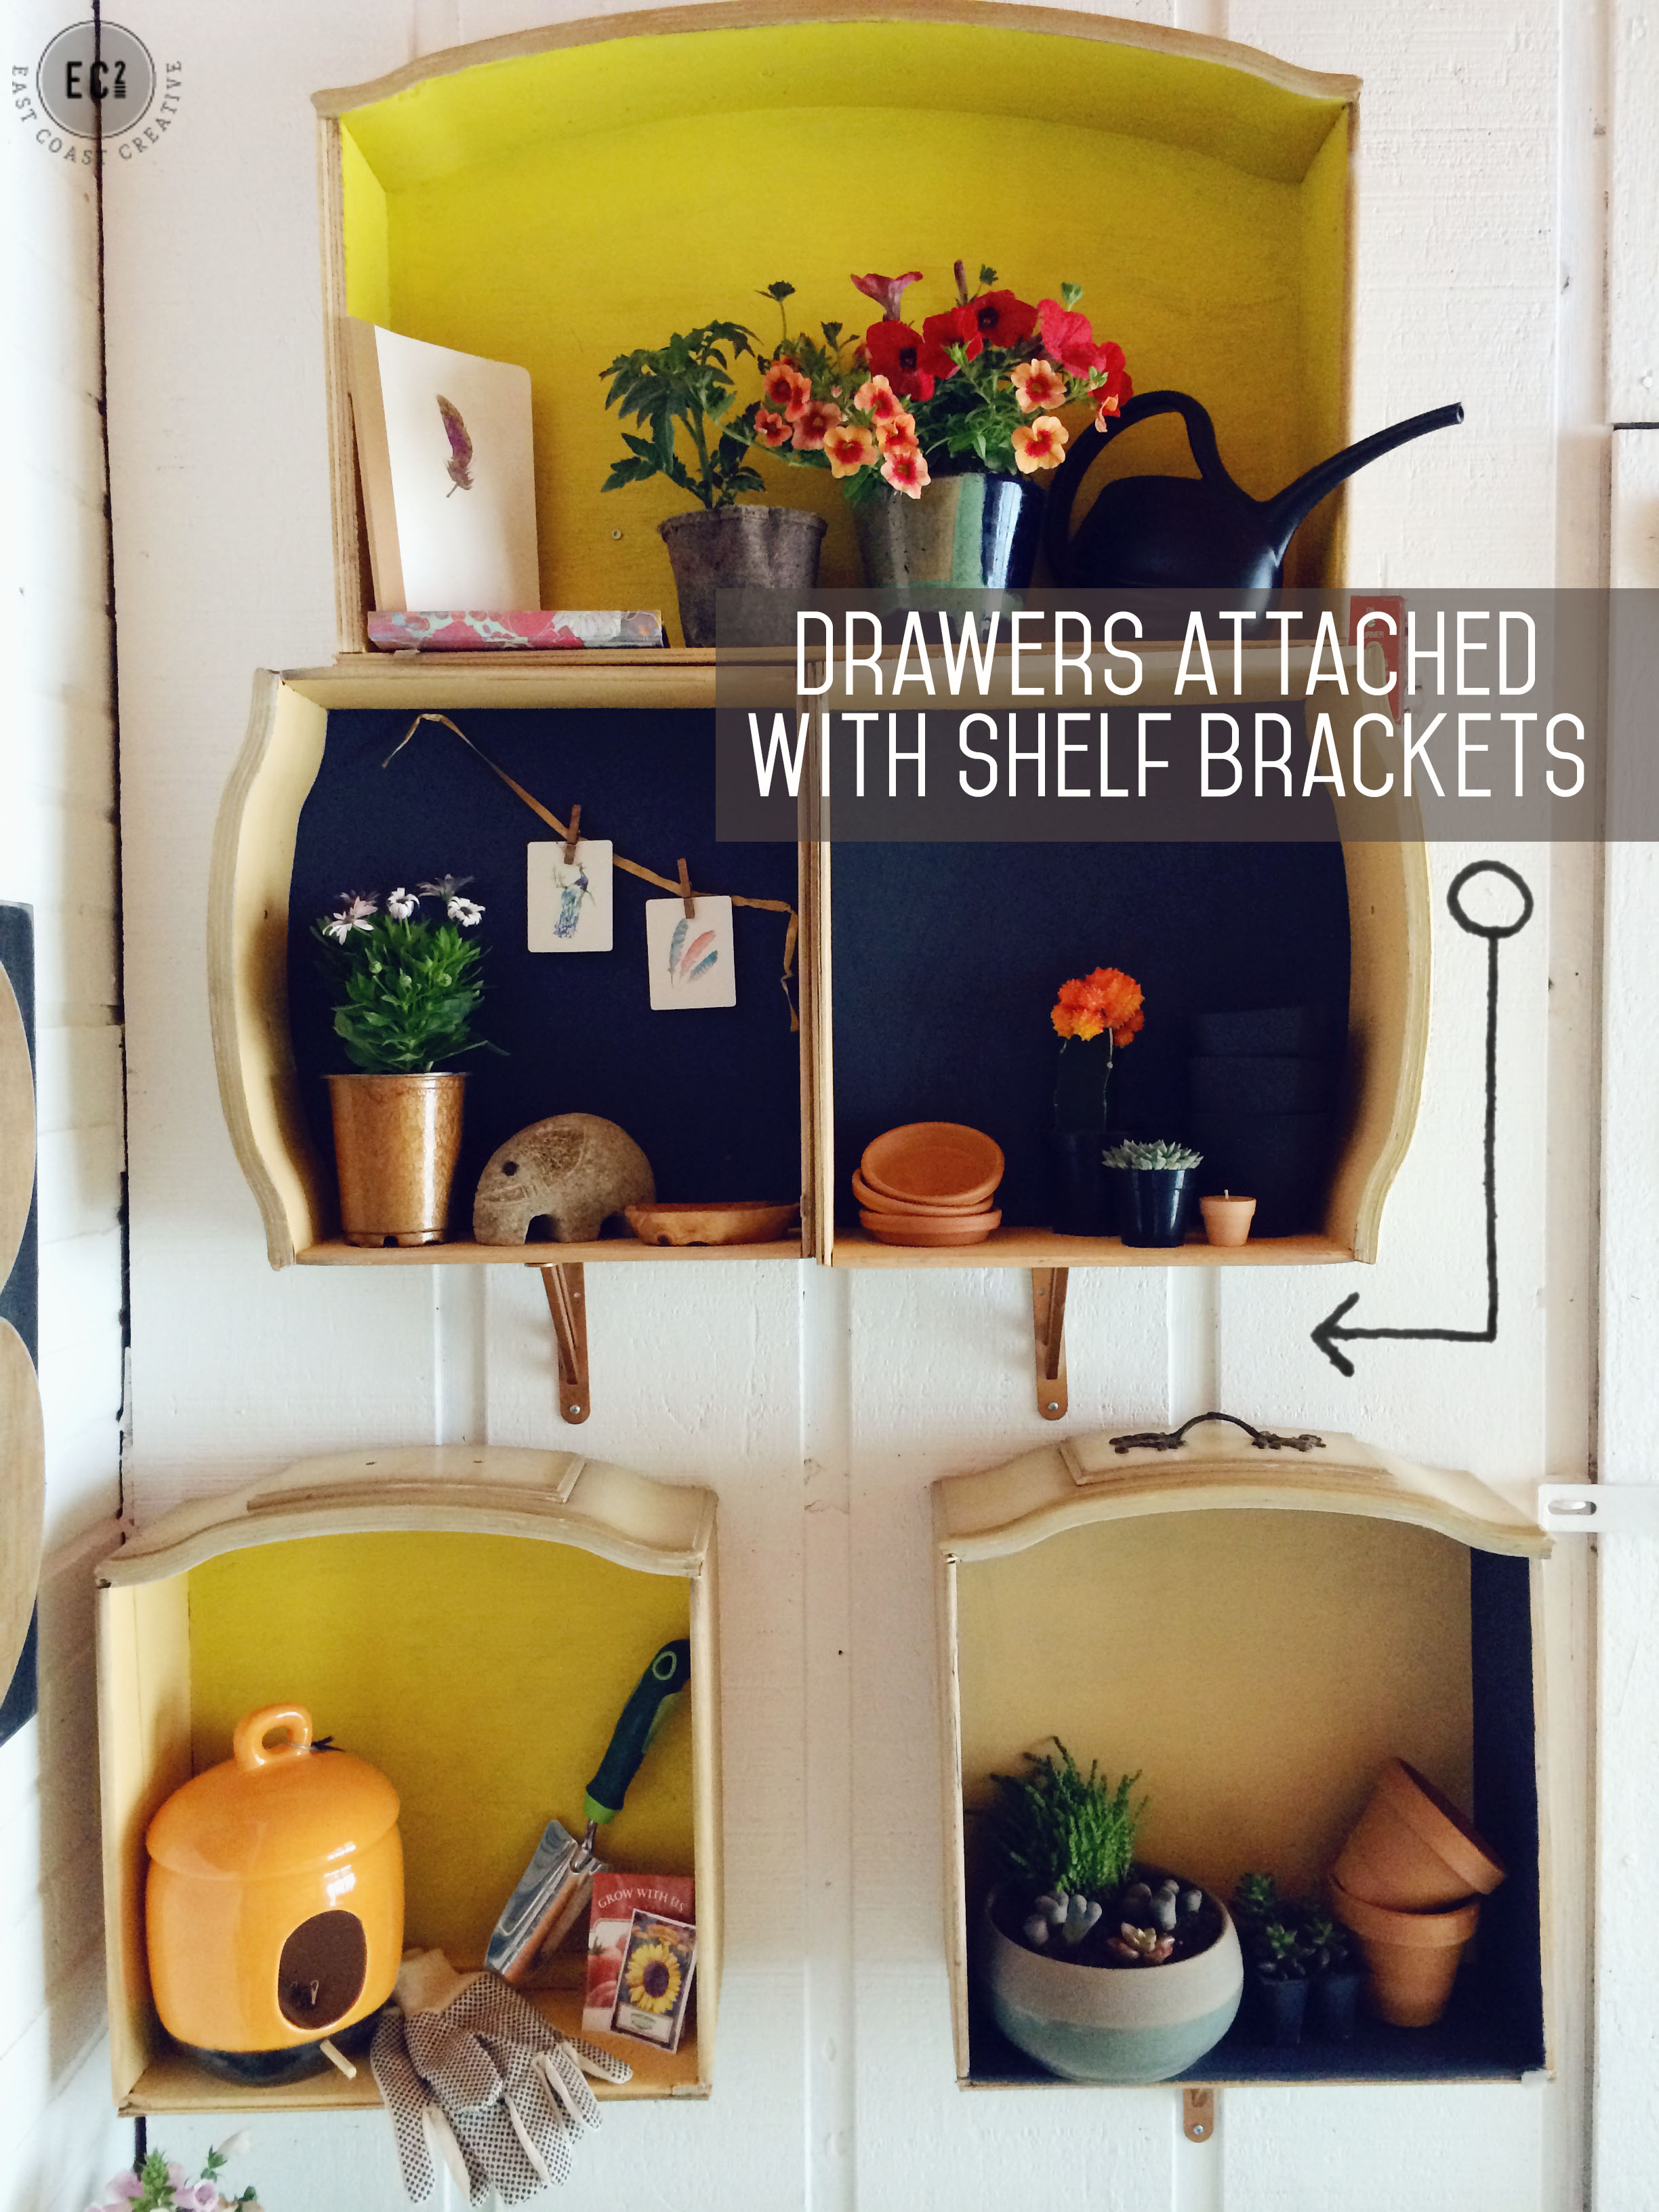 Wall Shelves Out Of Old Dresser Drawers, Turn Old Drawers Into Shelves